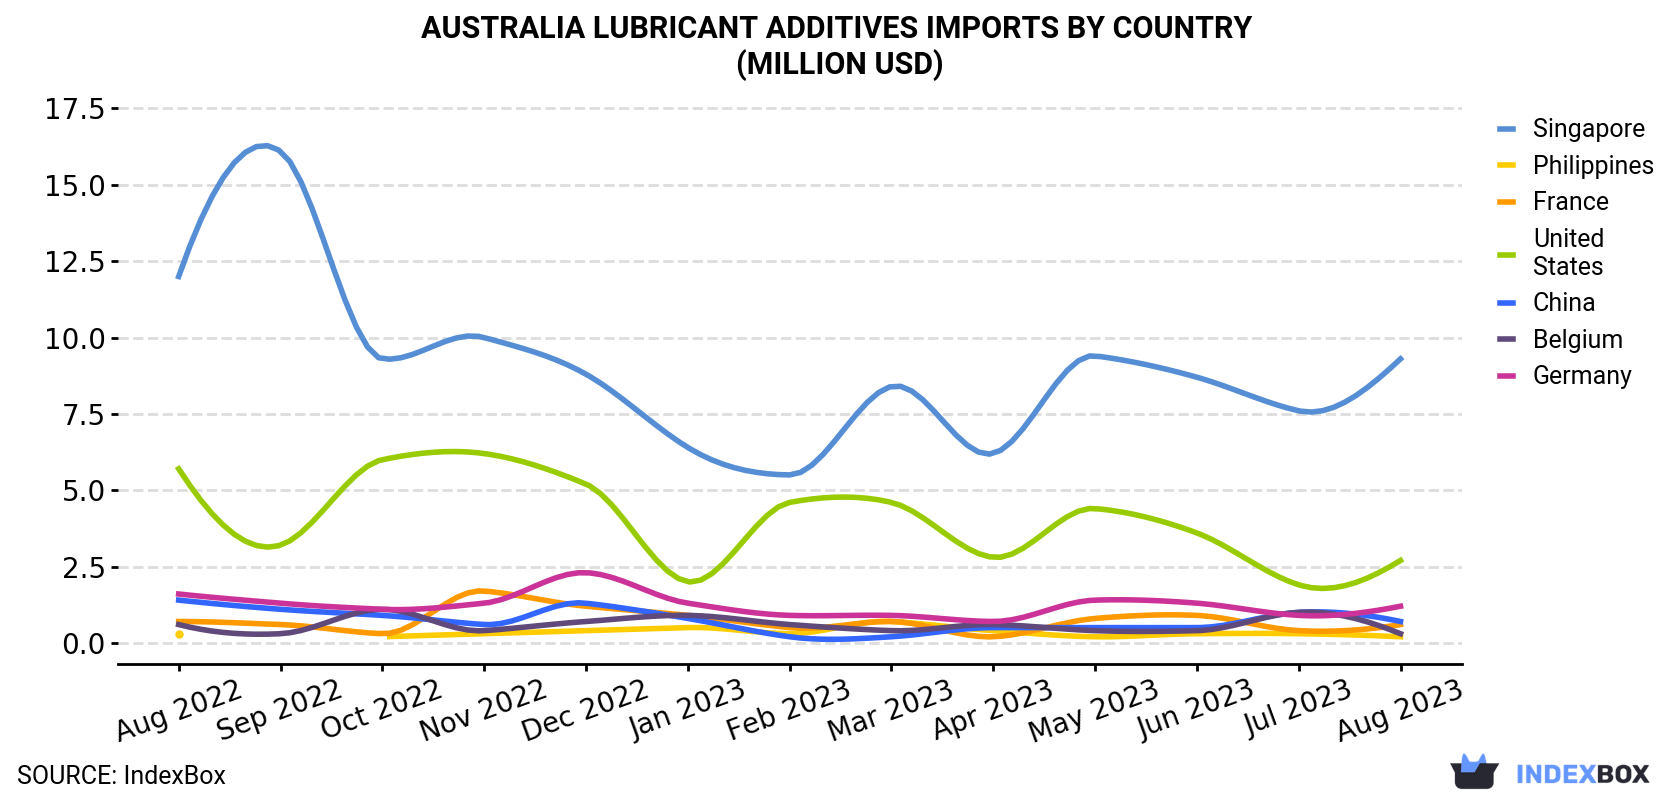 Australia Lubricant Additives Imports By Country (Million USD)